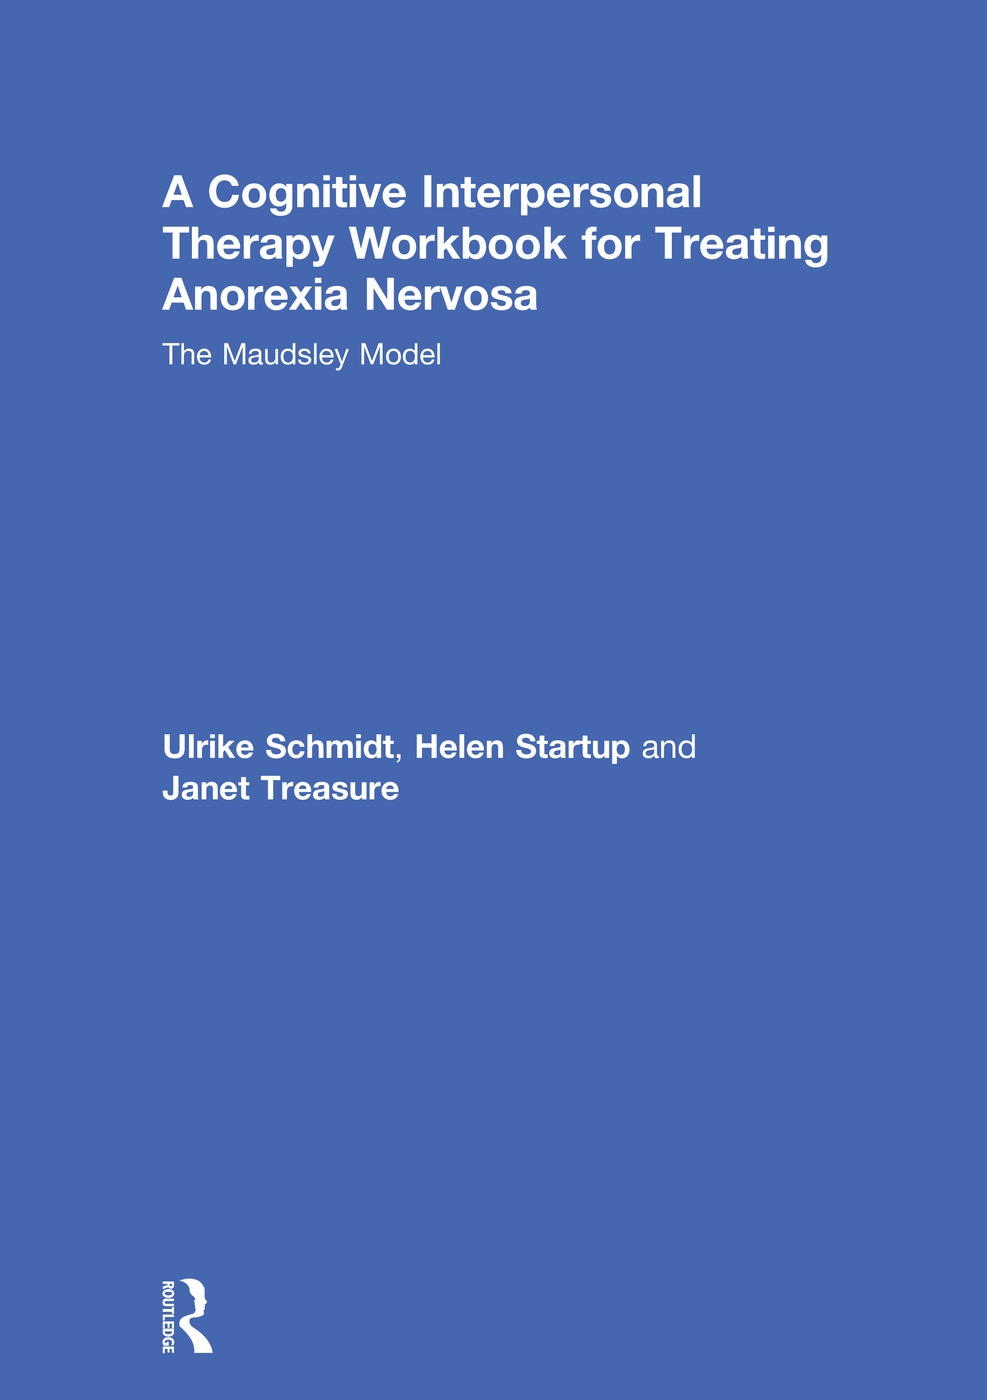 A Cognitive Interpersonal Therapy Workbook for Treating Anorexia Nervosa: The Maudsley Model